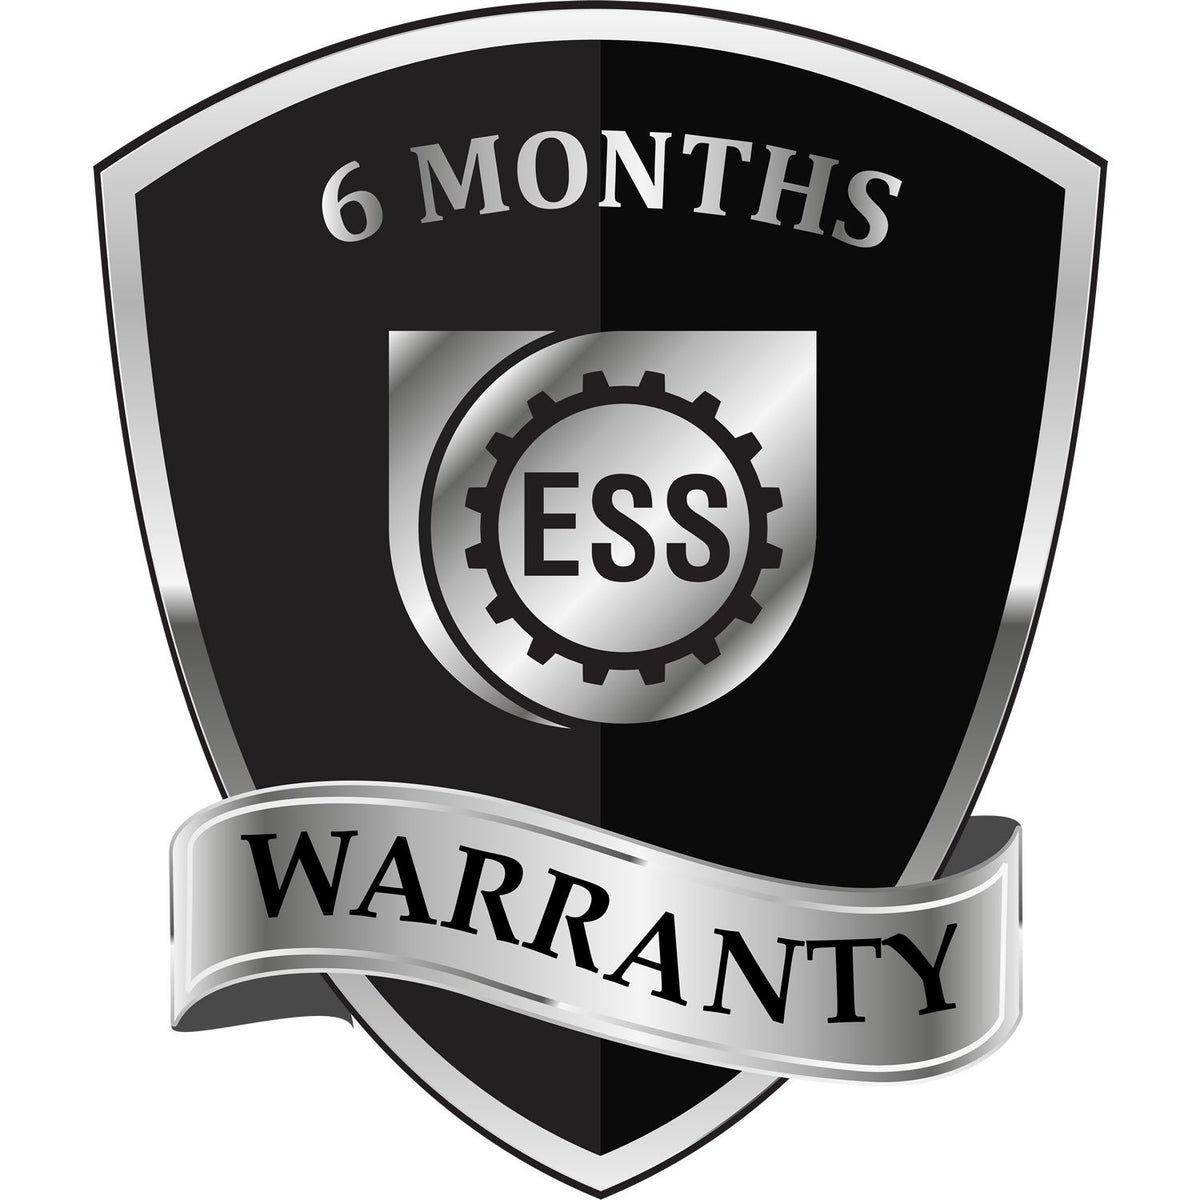 A badge or emblem showing a warranty icon for the Self-Inking Florida PE Stamp